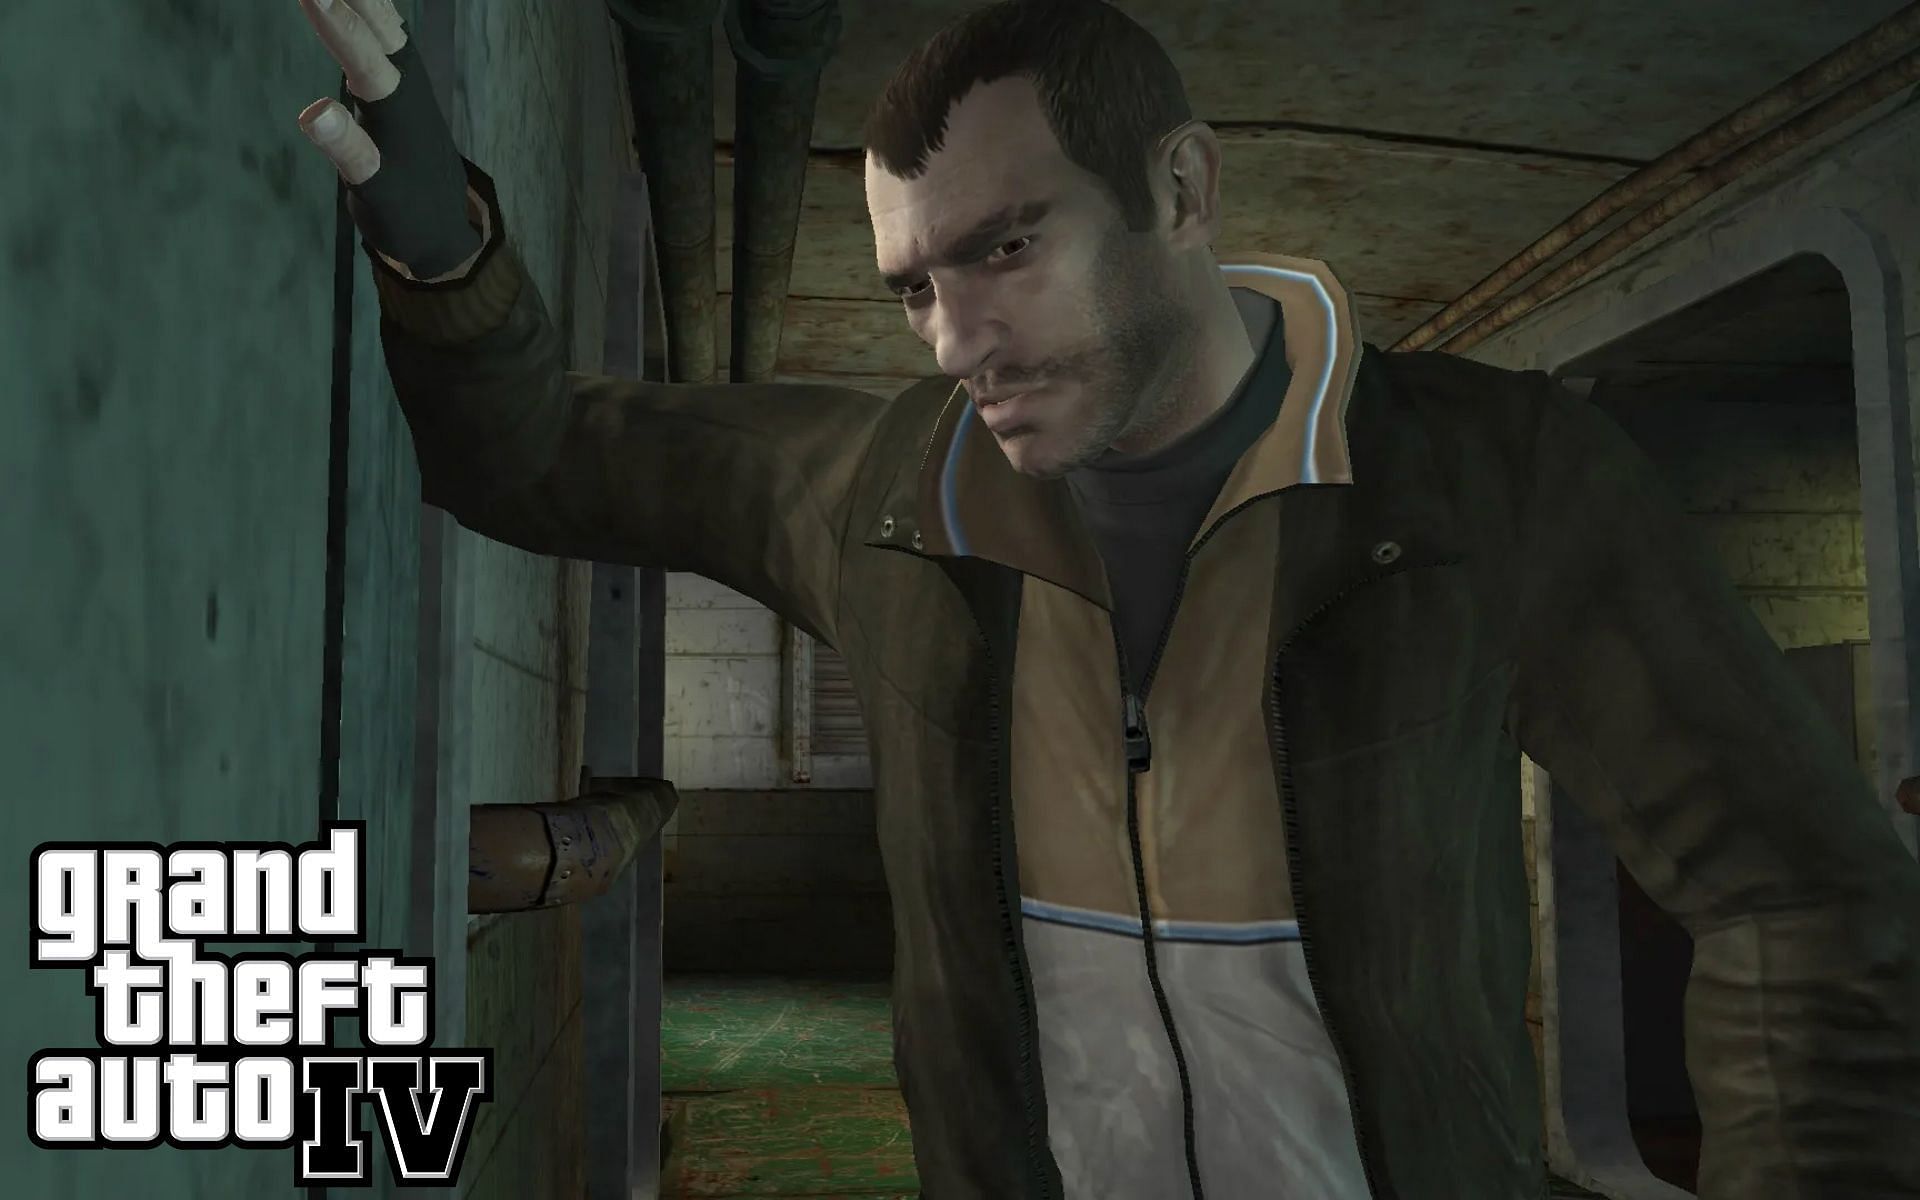 Mostly finished GTA IV Beta Build for the PSVita leaked and available for  download – The game that could have saved the PSVita which was never meant  to be. 